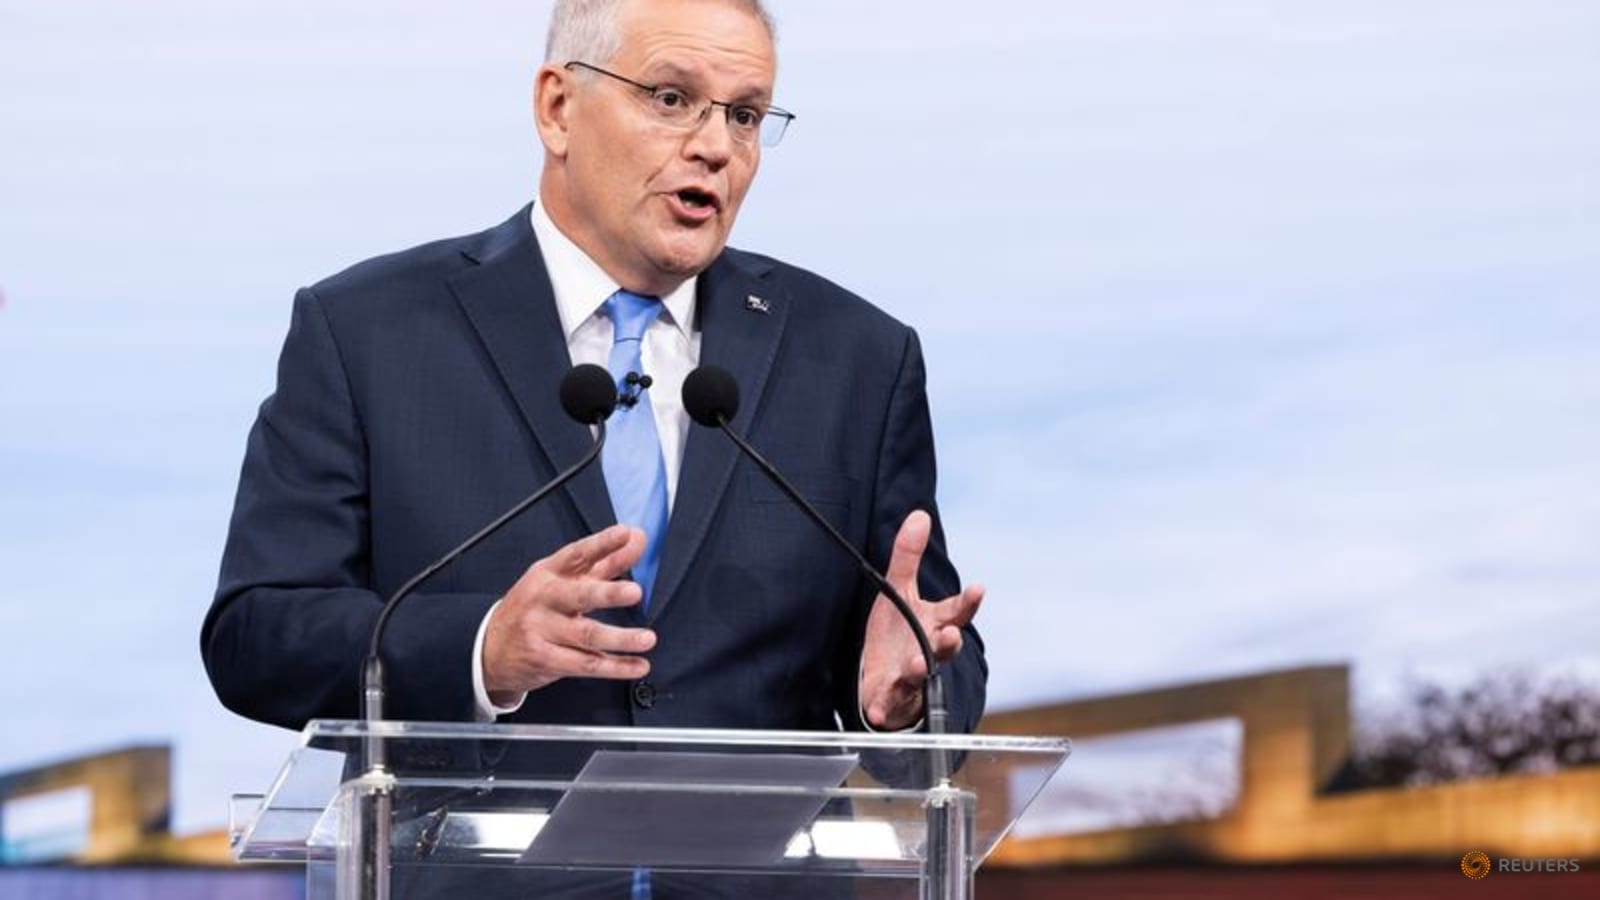 Australia's Morrison says he took five ministries because he was 'steering the ship'